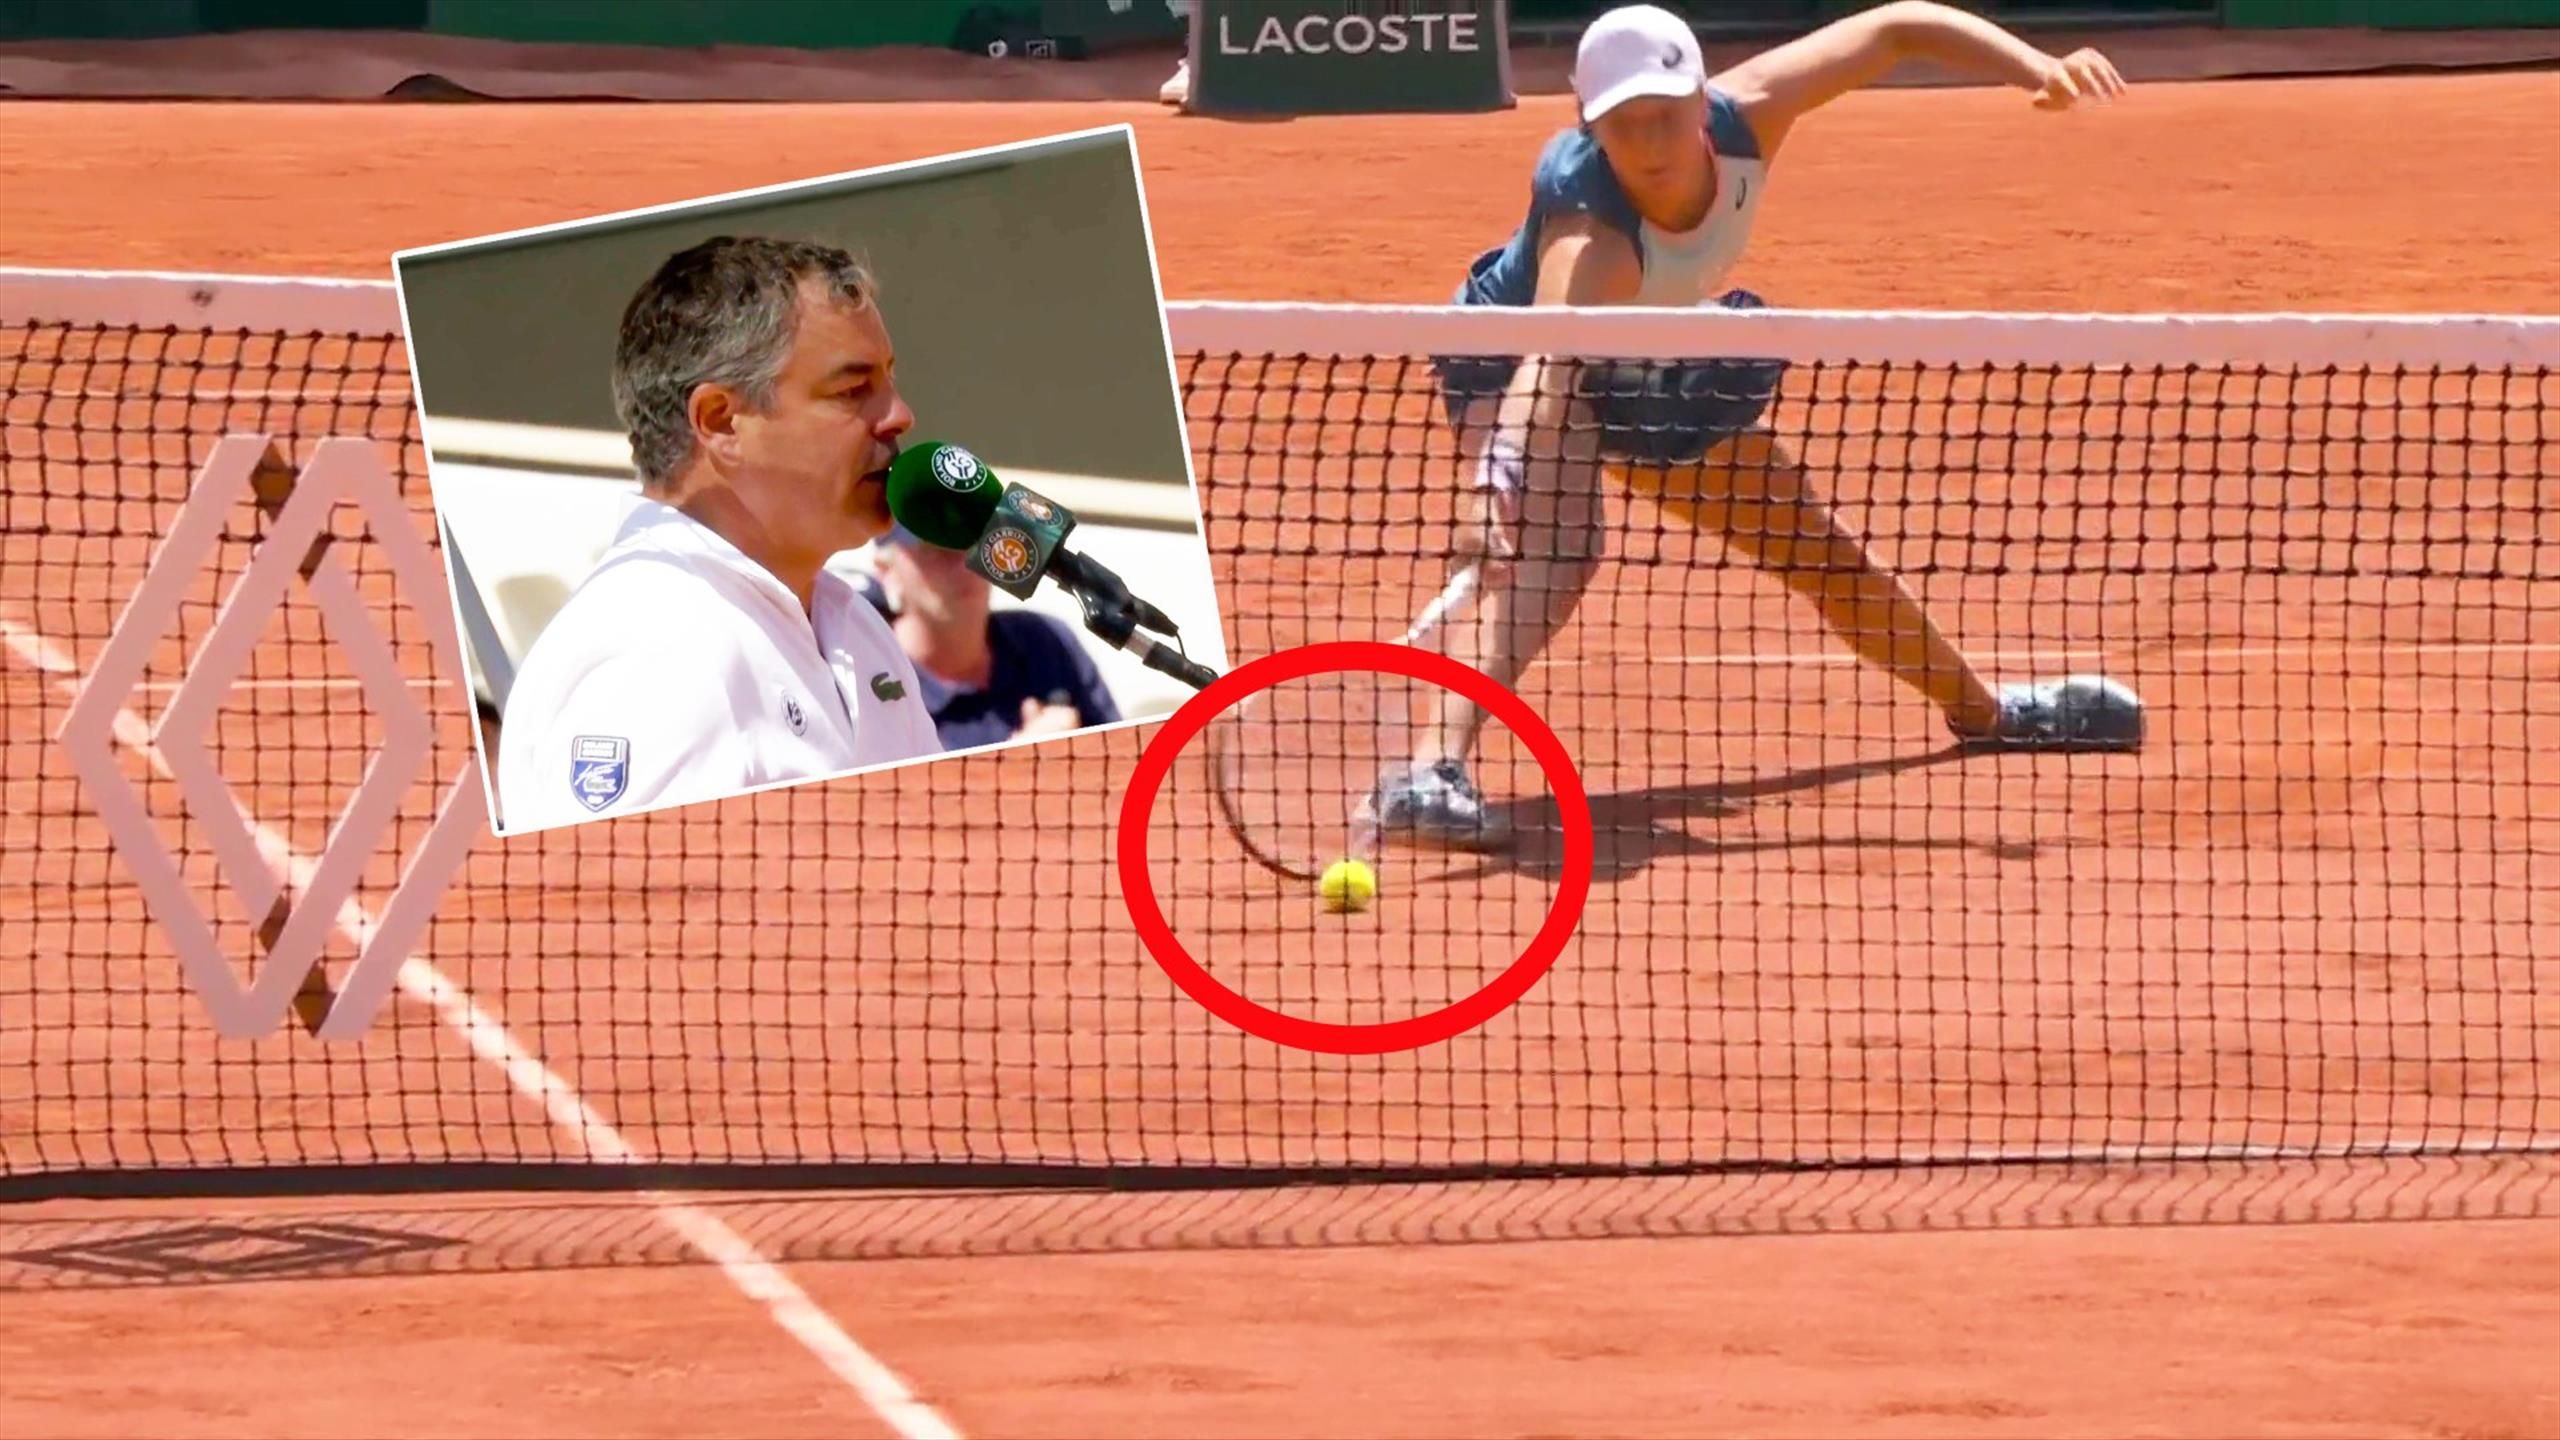 No she didnt! - Watch controversial moment ball bounces twice as Iga Swiatek wins key point at French Open - Tennis video